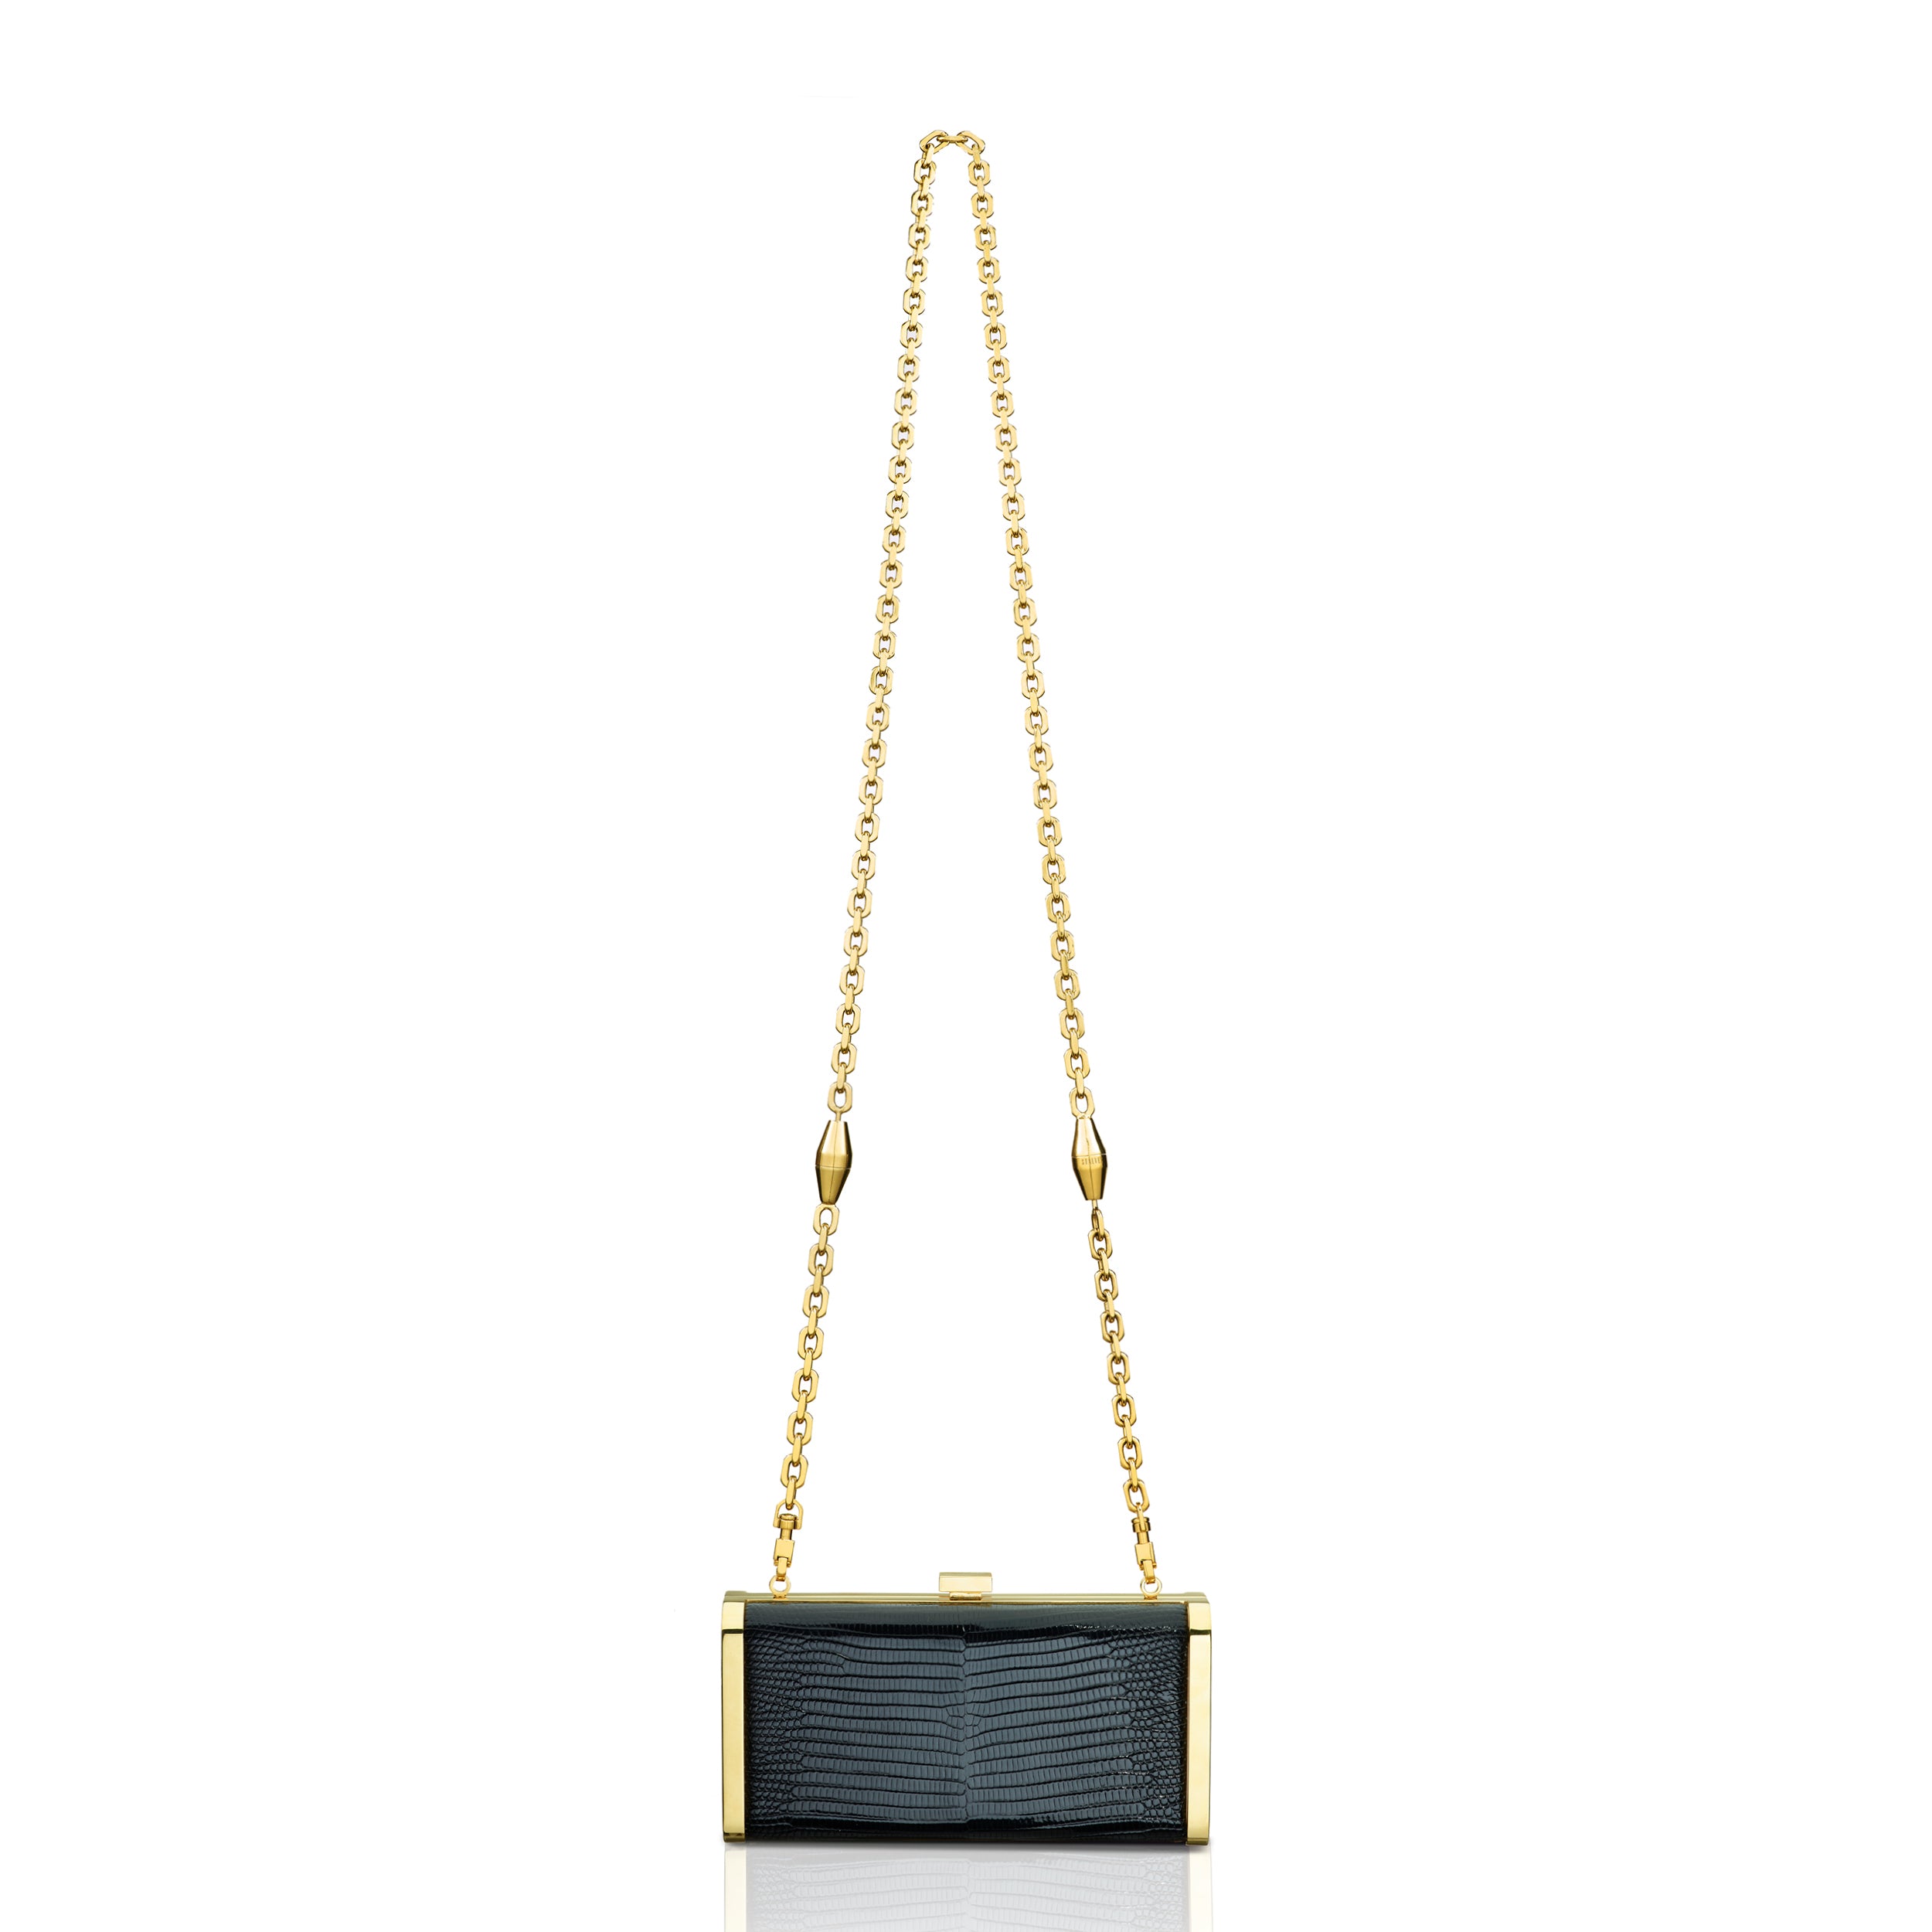 STALVEY Square Clutch in Black Lizard with 24kt Gold Hardware Back View with Chain